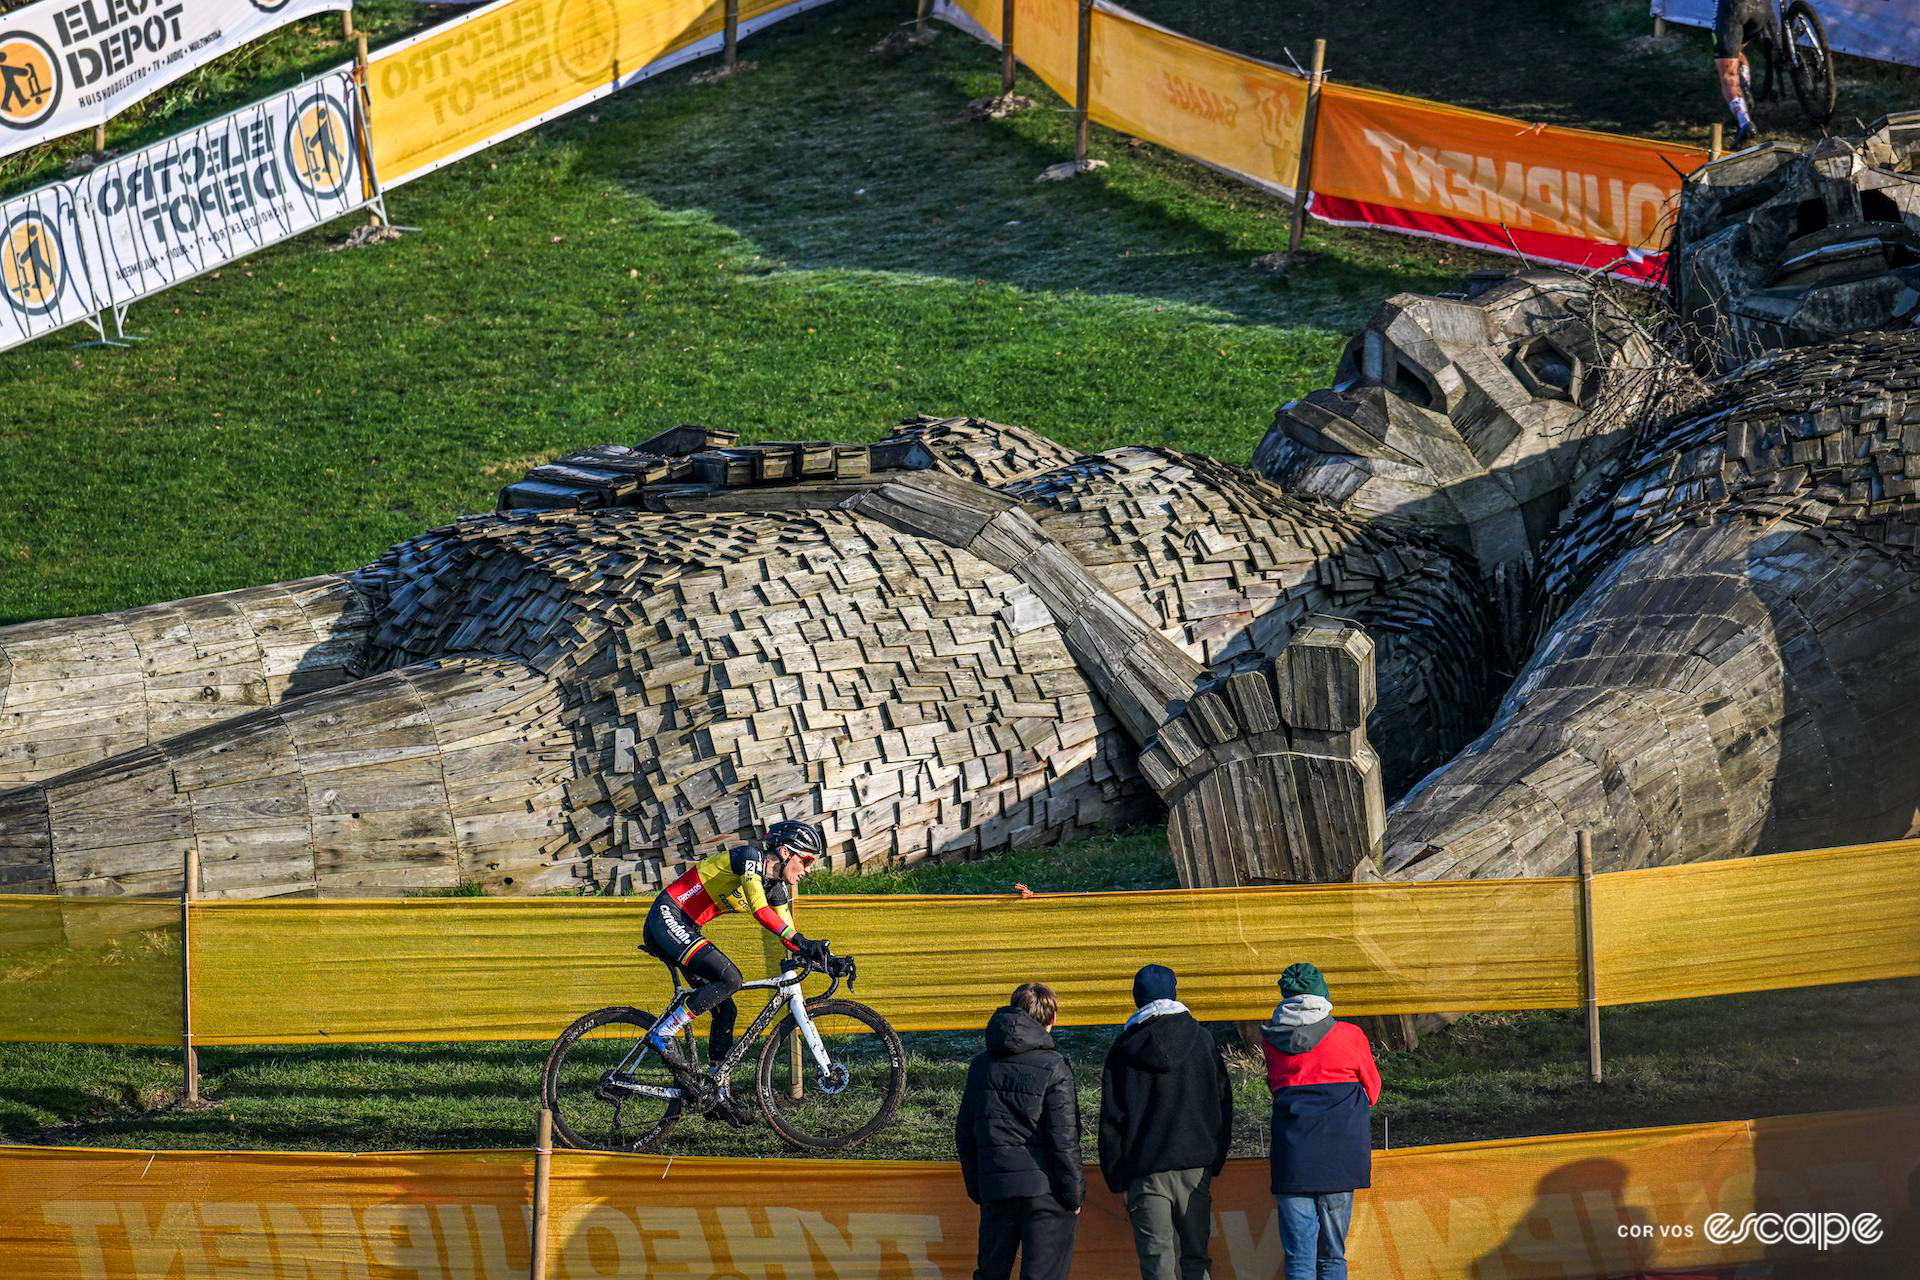 Belgian national champion Sanne Cant rides around the famous huge troll statues during Superprestige Boom.